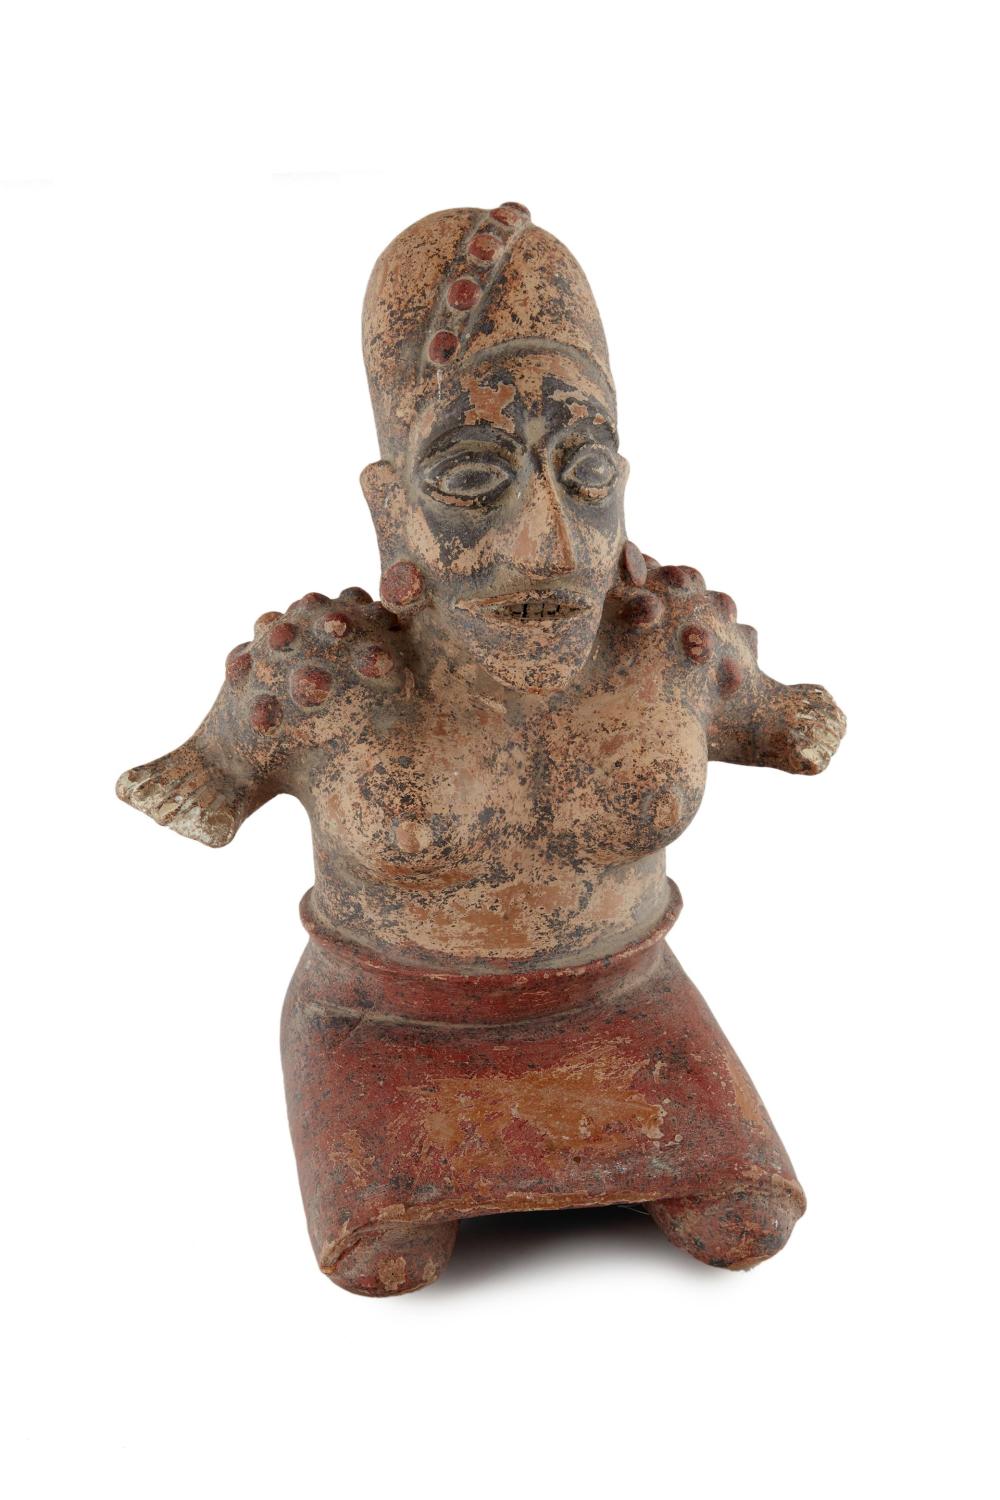 A JALISCO REDWARE FIGURE OF A SEATED